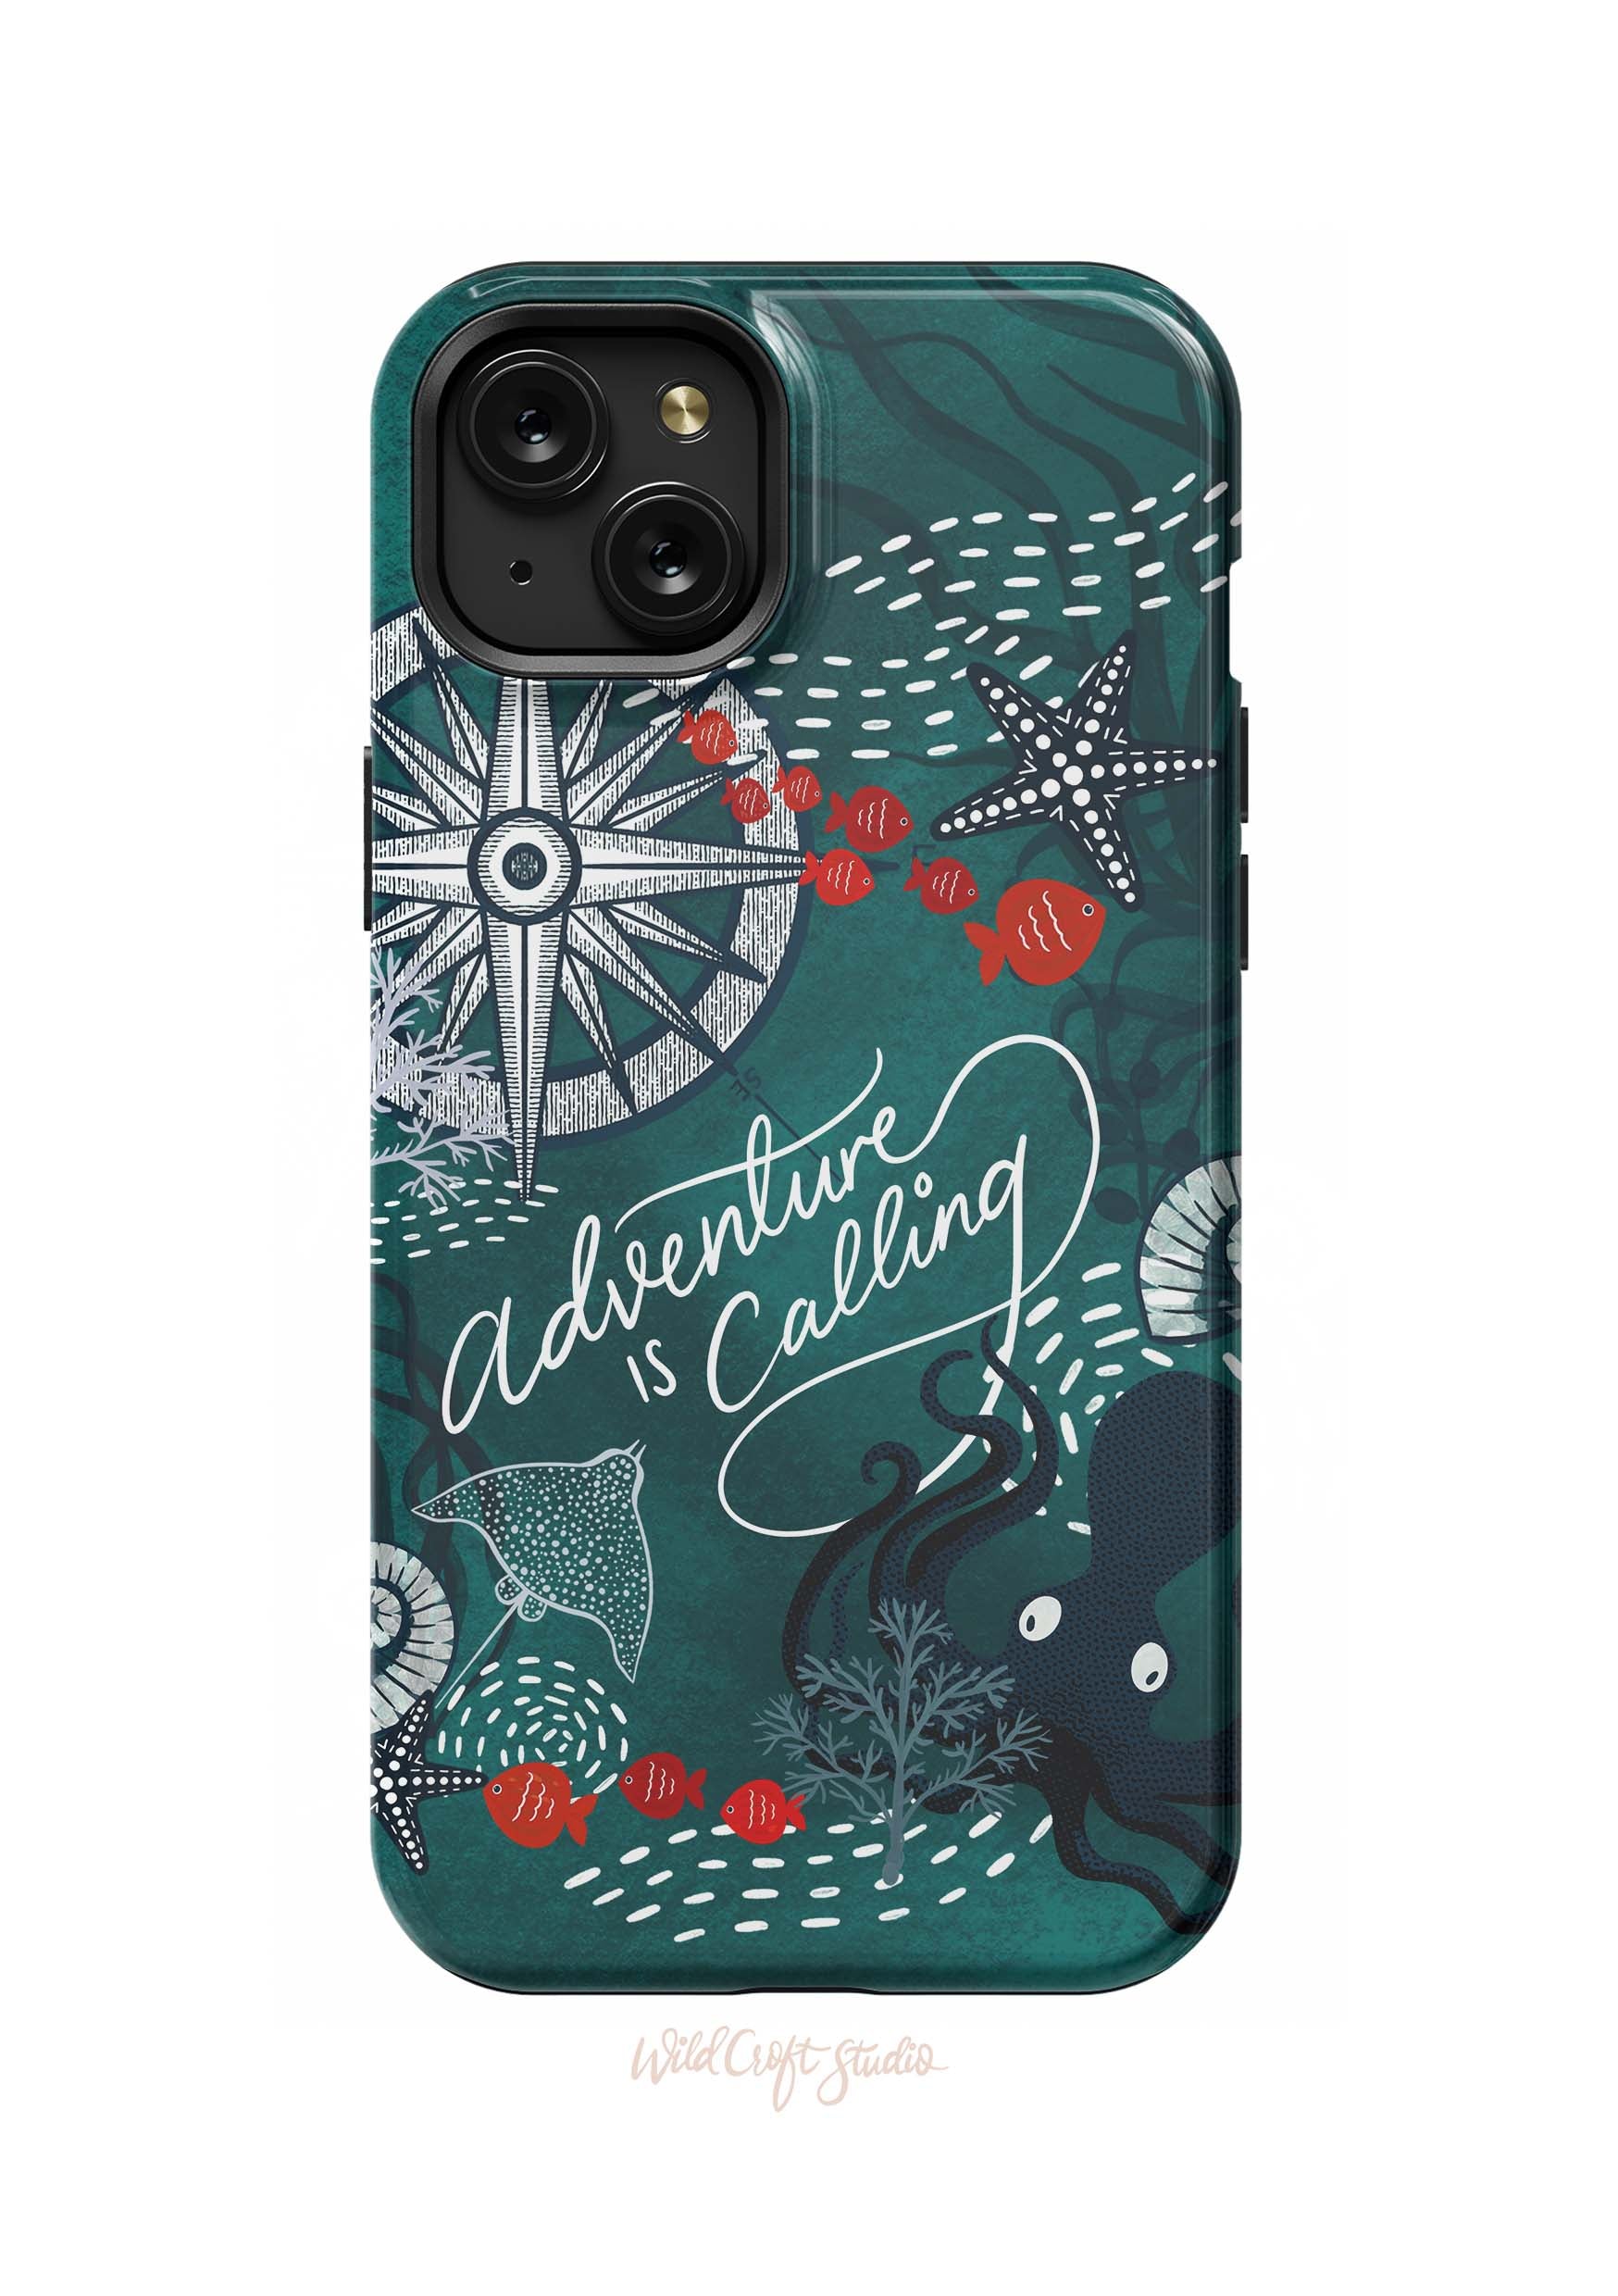 a phone case with an image of an ocean scene